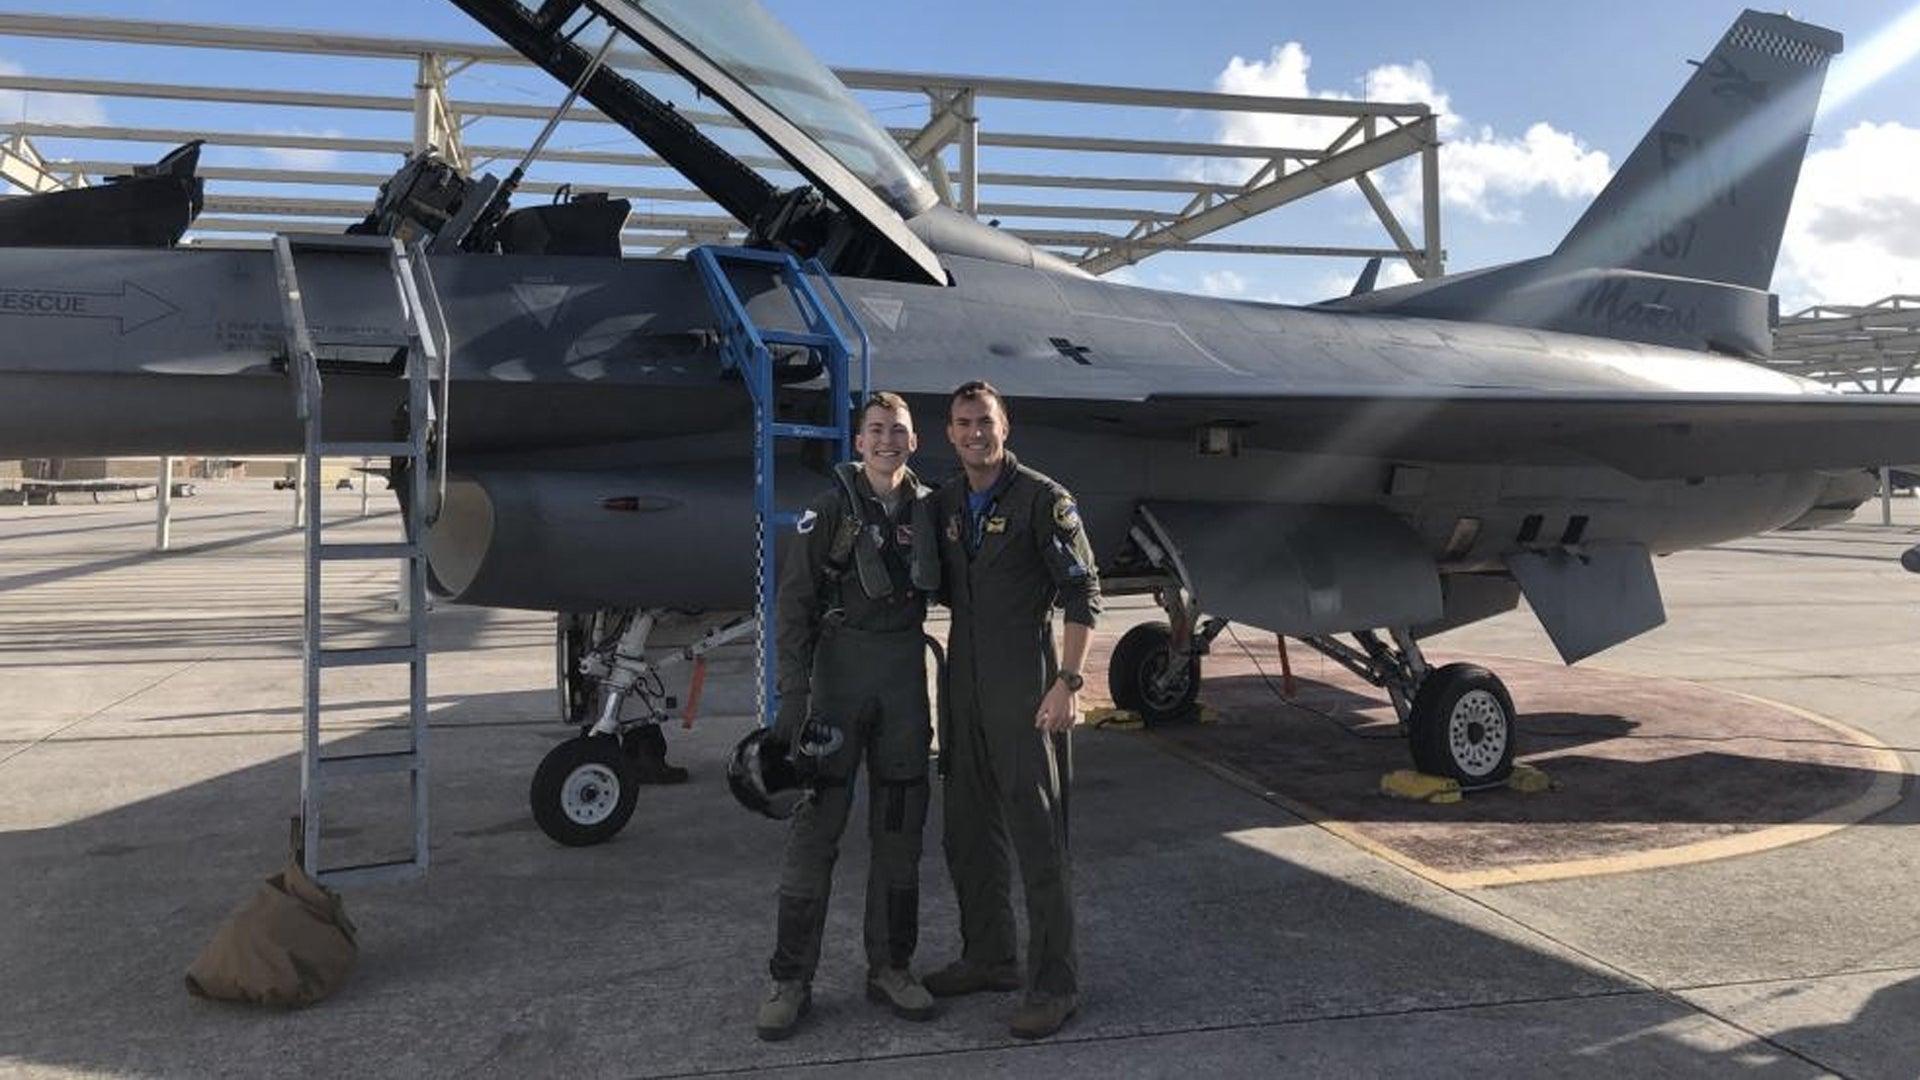 U.S. Air Force 1st Lt. Chad Chapman (left), 47th Student Squadron T-38 Talon student pilot, poses with his older brother, Capt. James Chapman (right), in front of an F-16D. (U.S. Air Force courtesy photo)